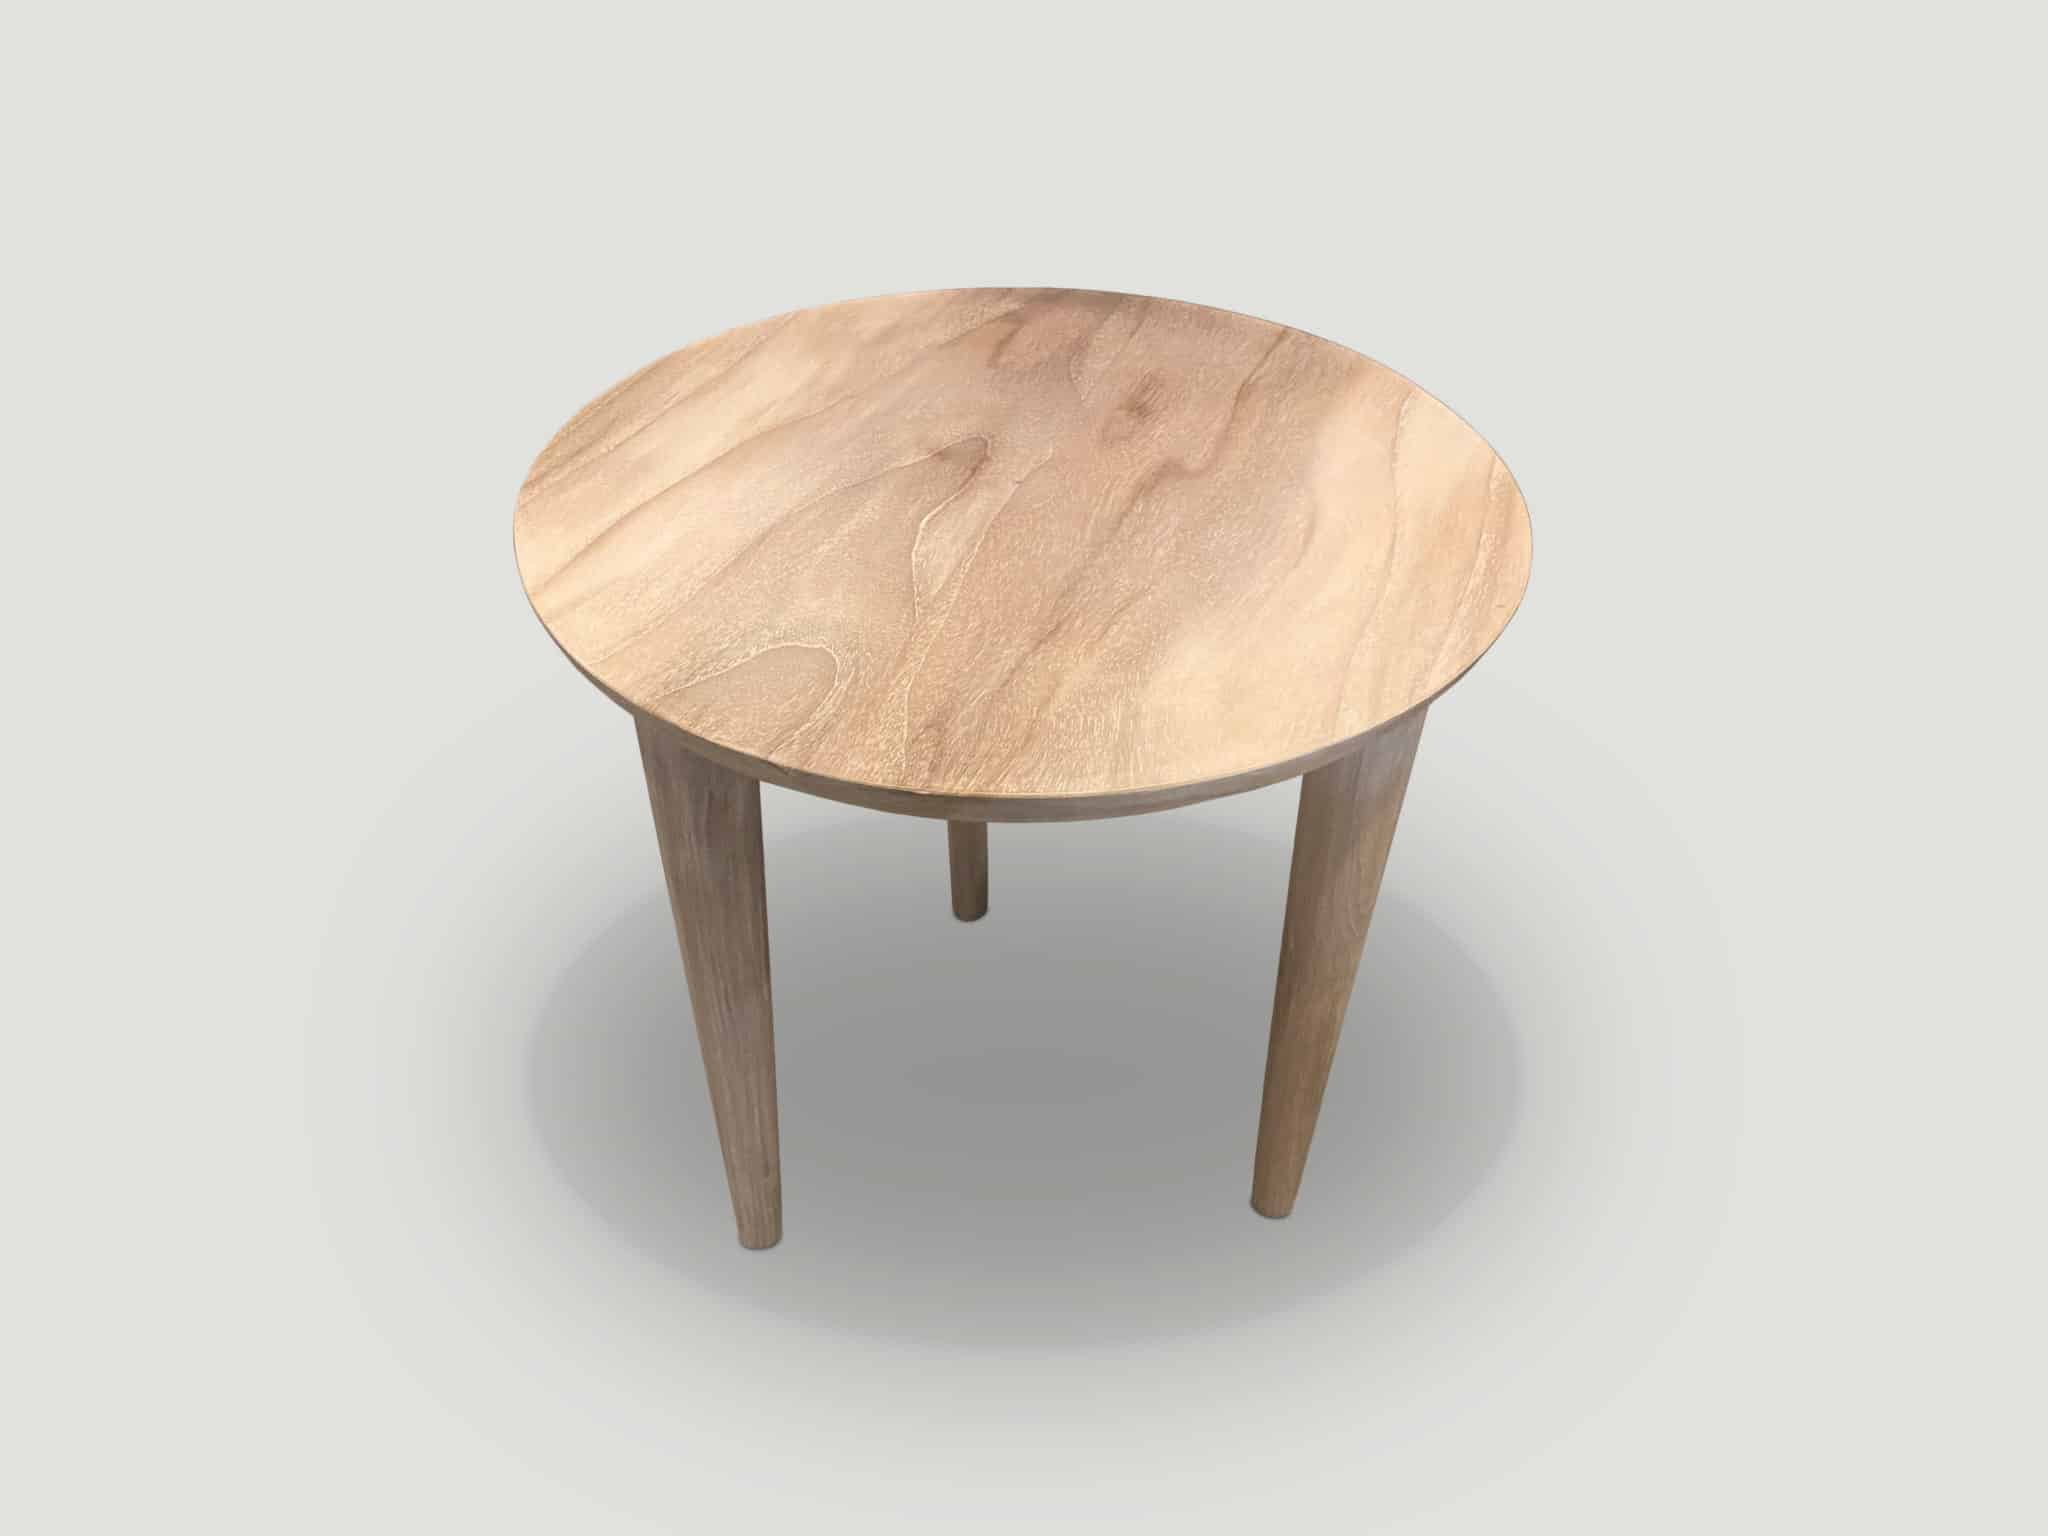 Minimalist white washed teak wood side table with a bevelled top